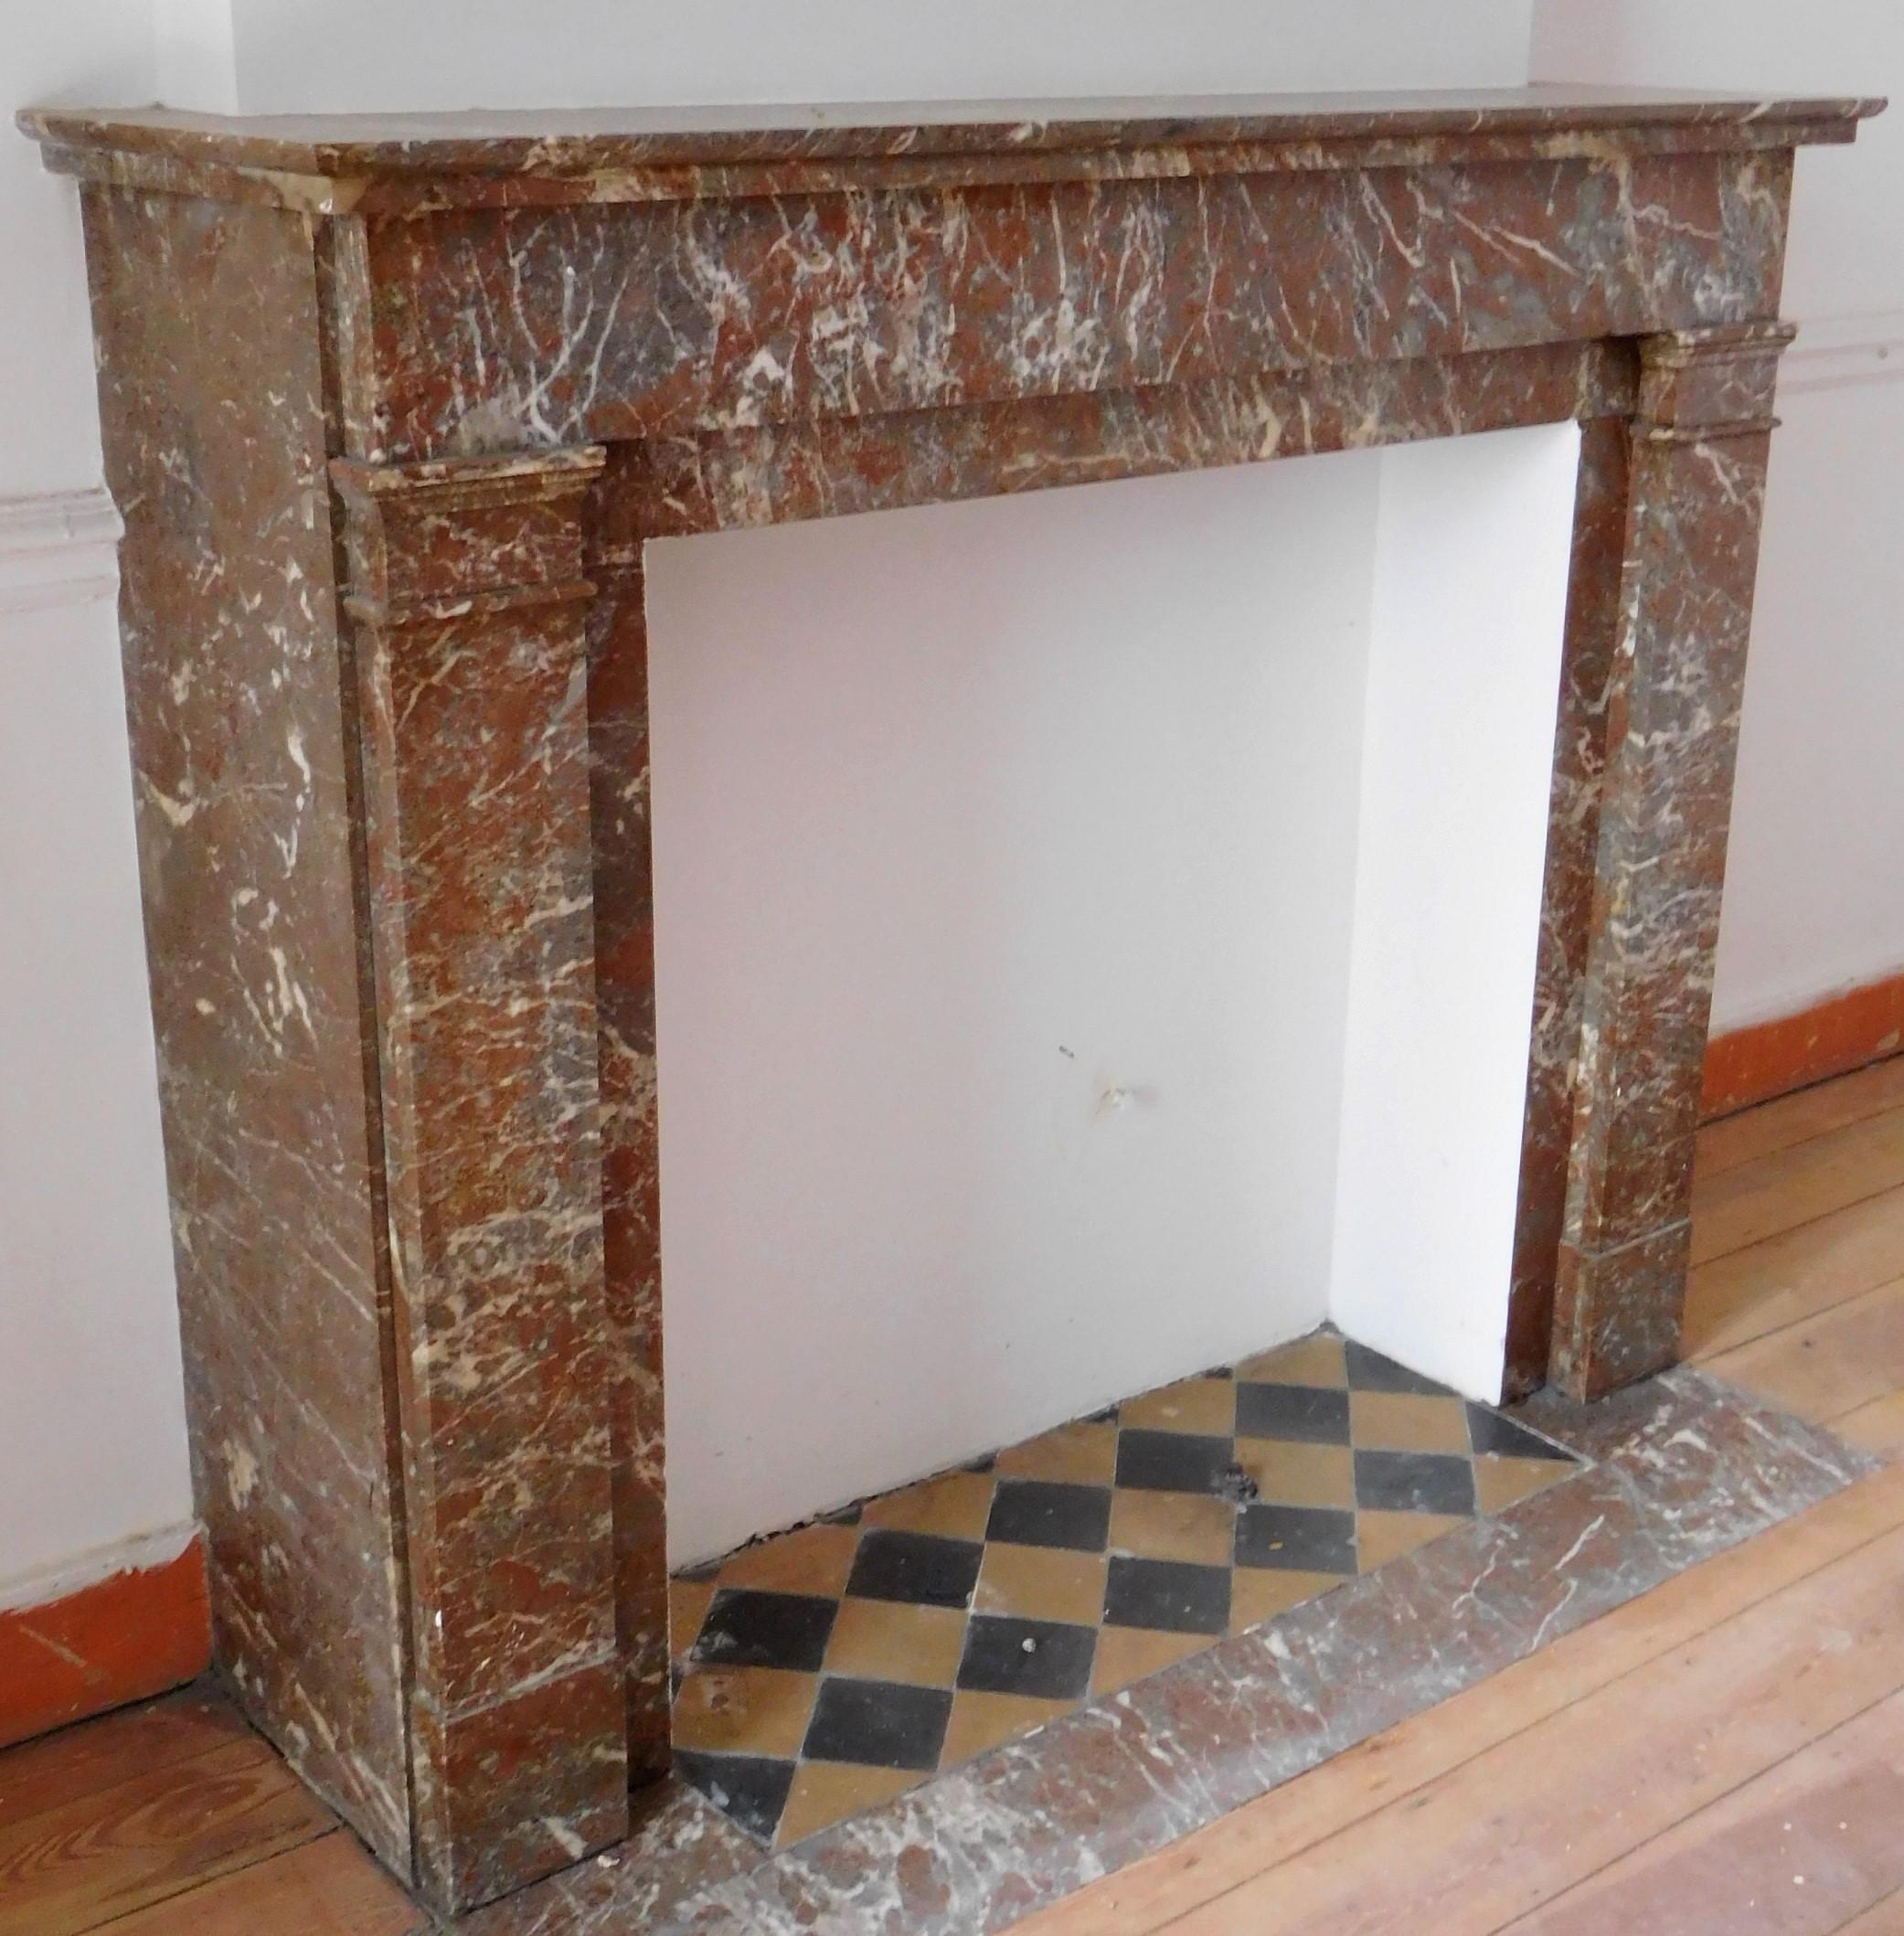 This beautiful antique fireplace in a Belgian Red marble was made in the Art Déco period. The sleek lines of this fireplace provides a subdued, quiet ambiance. The powerful color of the marble is sufficient to be impressive.  The 'Art Deco Bronze'